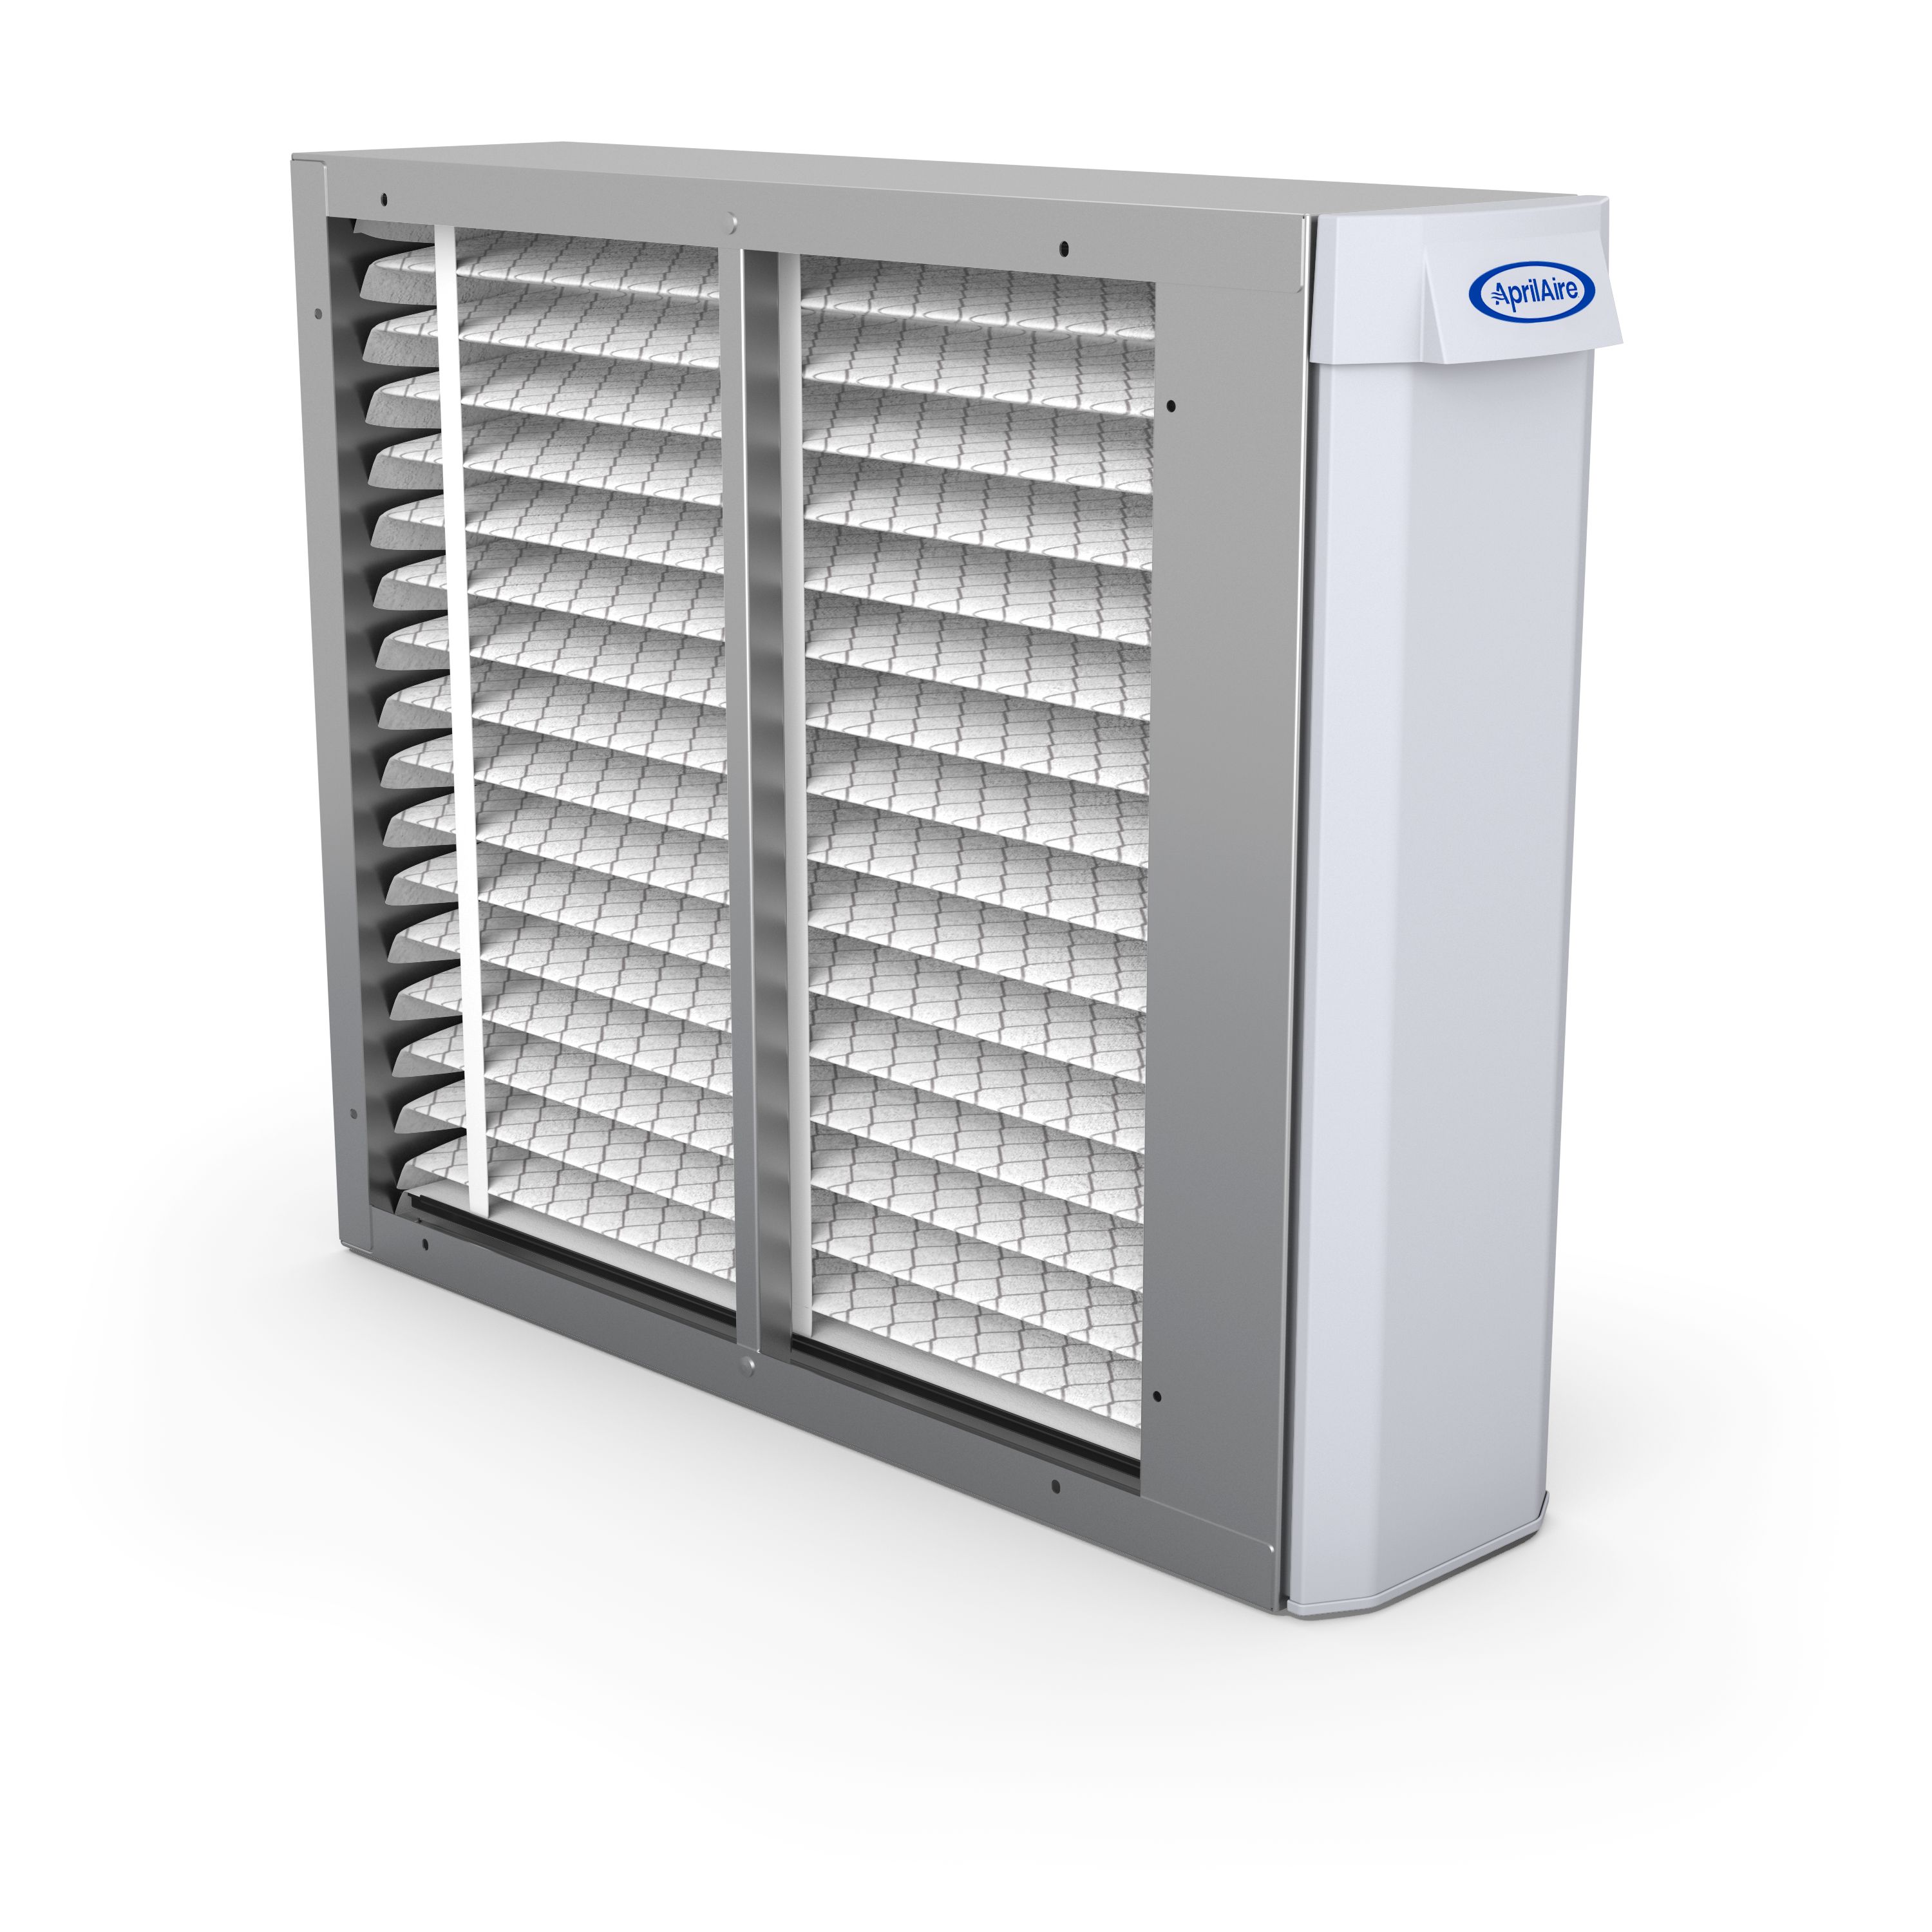 1210 APRILAIRE AIR CLEANER